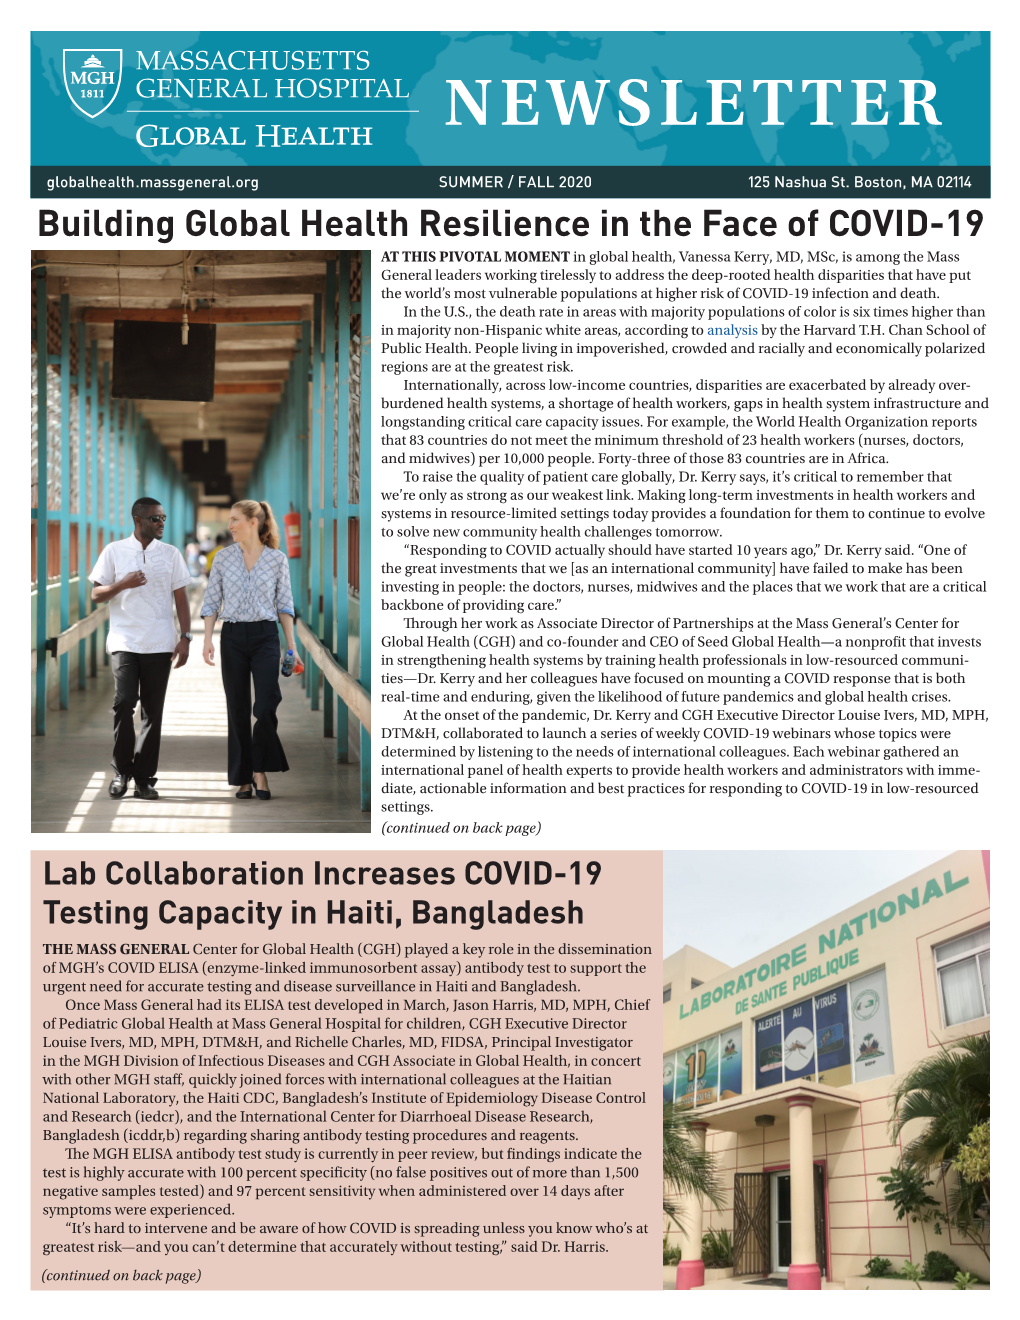 Building Global Health Resilience in the Face of COVID-19